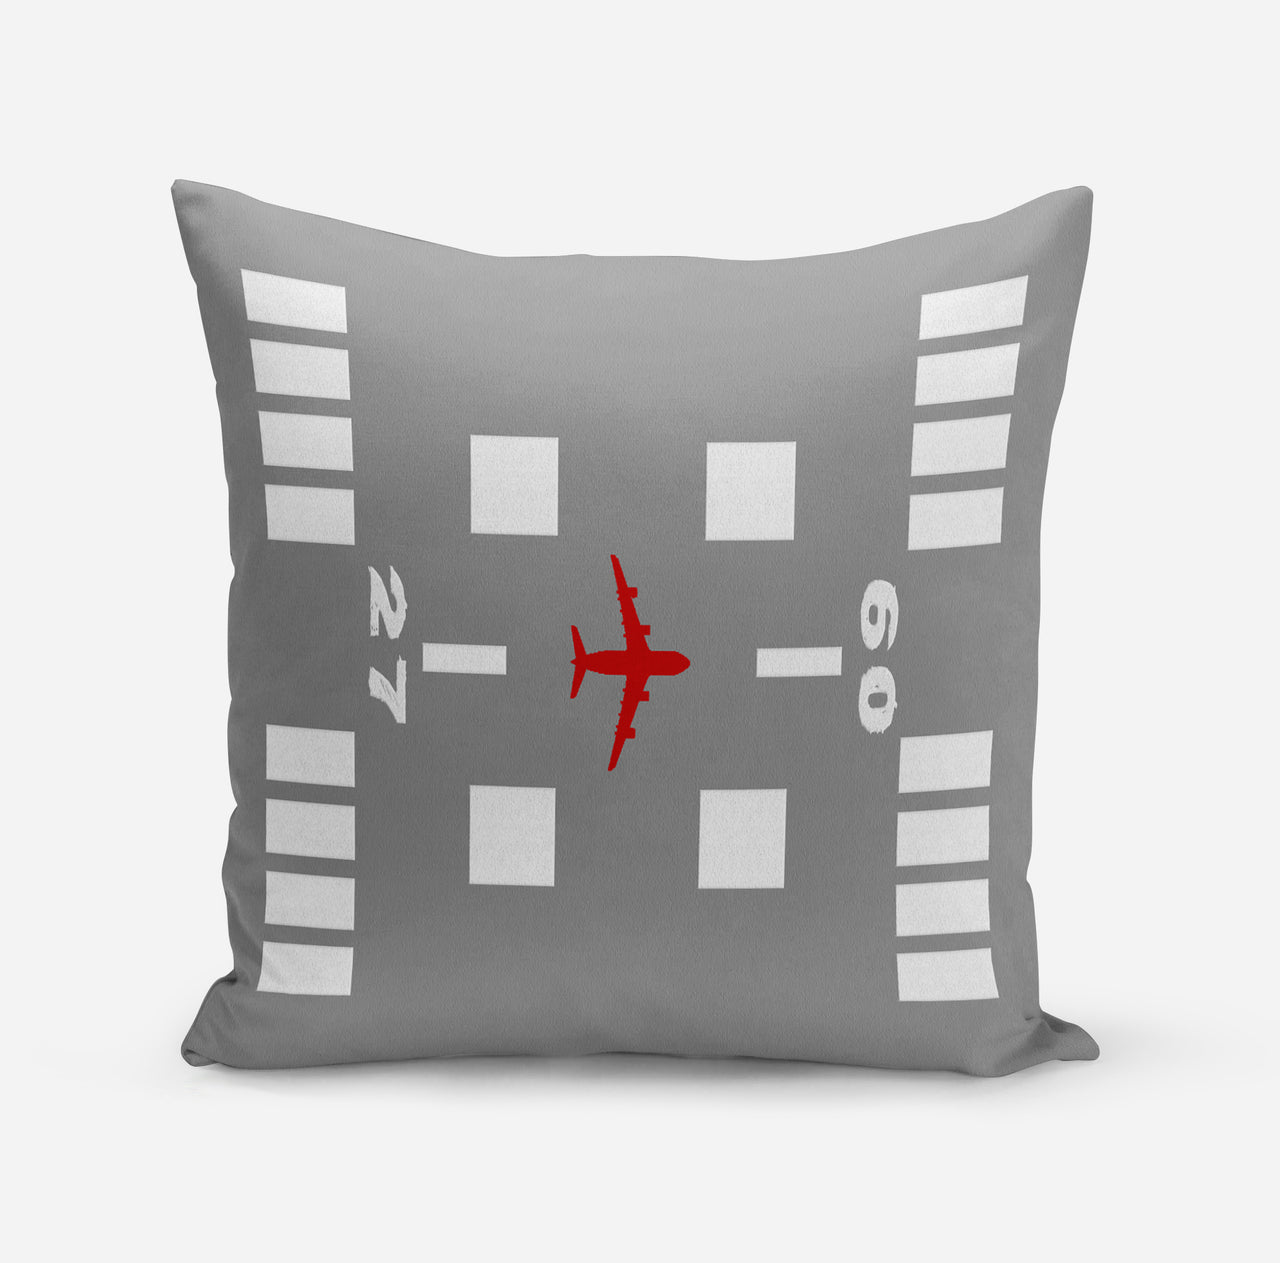 Special Runway-Gray Designed Pillows